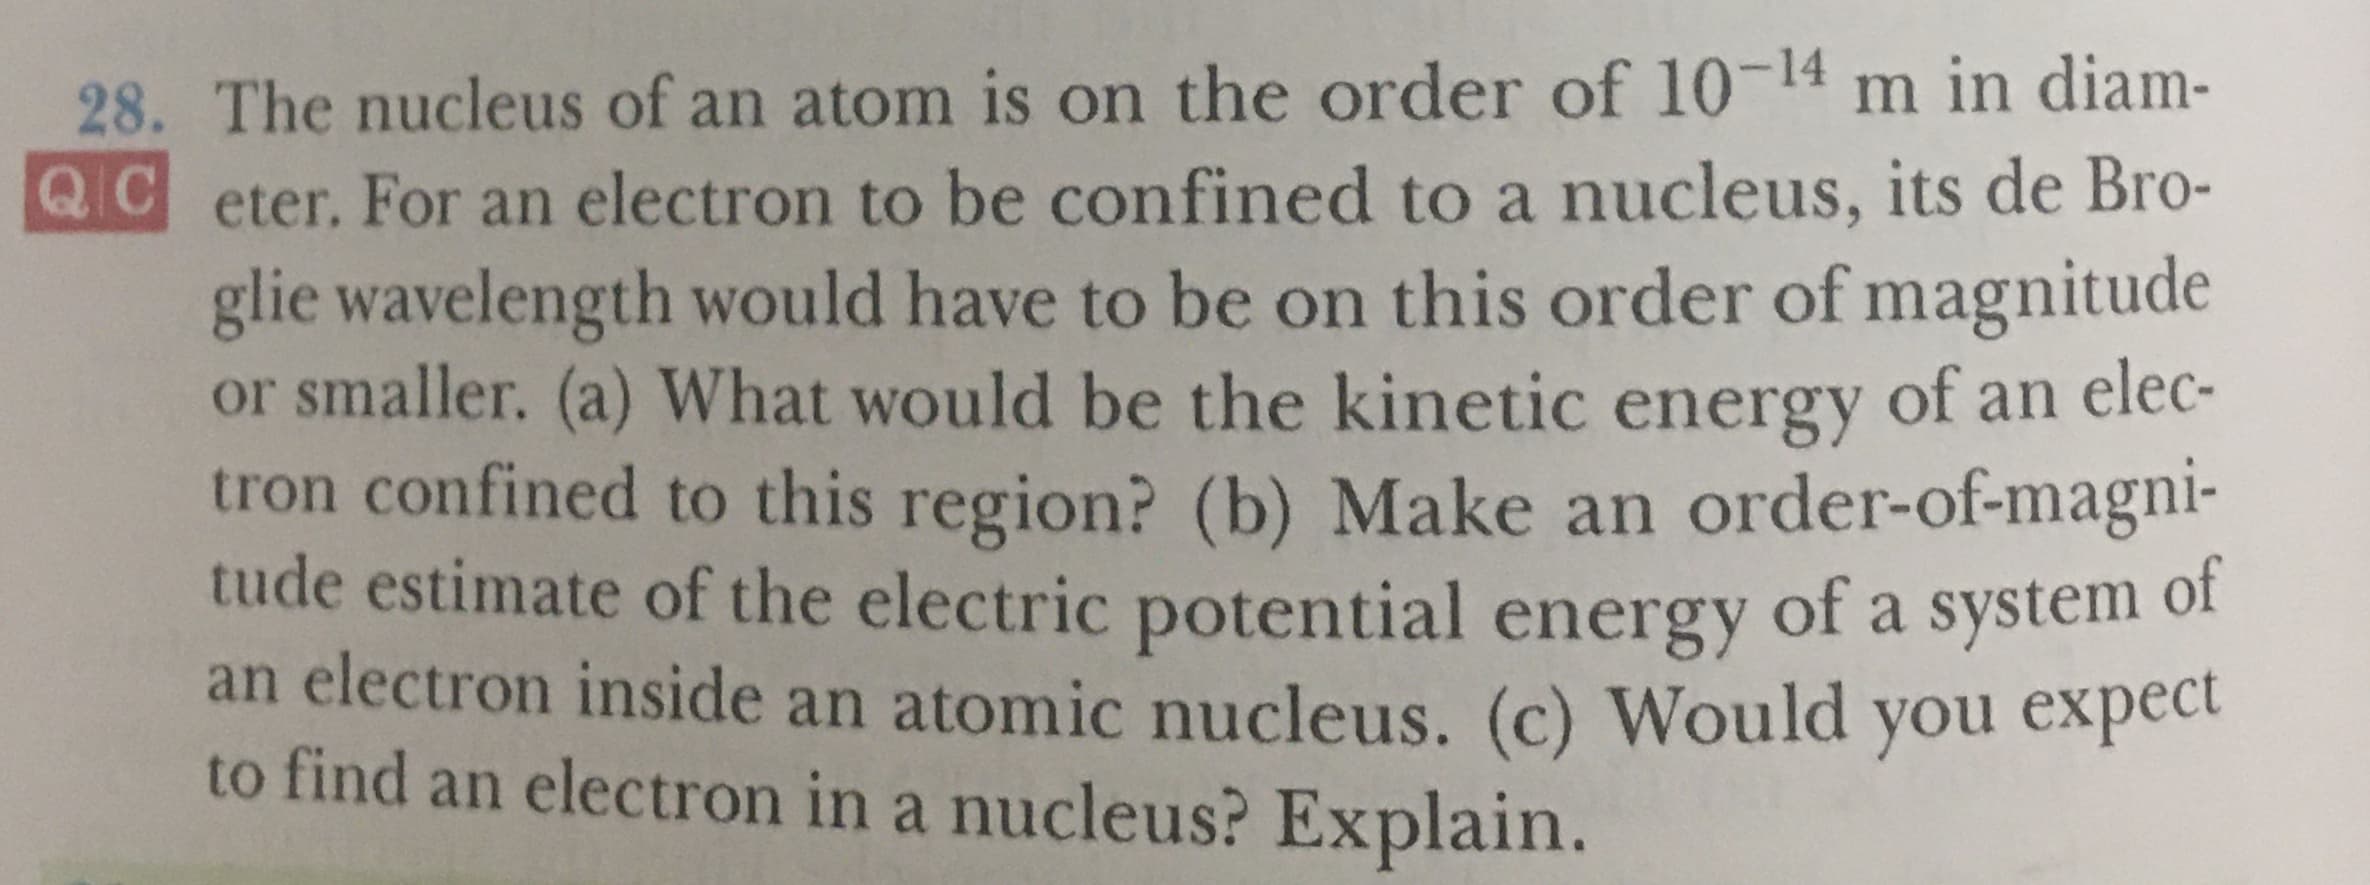 28. The nucleus of an atom is on the order of 10-14 m in diam-
QC eter. For an electron to be confined to a nucleus, its de Bro-
glie wavelength would have to be on this order of magnitude
or smaller. (a) What would be the kinetic energy of an elec-
tron confined to this region? (b) Make an order-of-magni-
tude estimate of the electric potential energy of a system of
an electron inside an atomic nucleus. (c) Would you expec
to find an electron in a nucleus? Explain.
